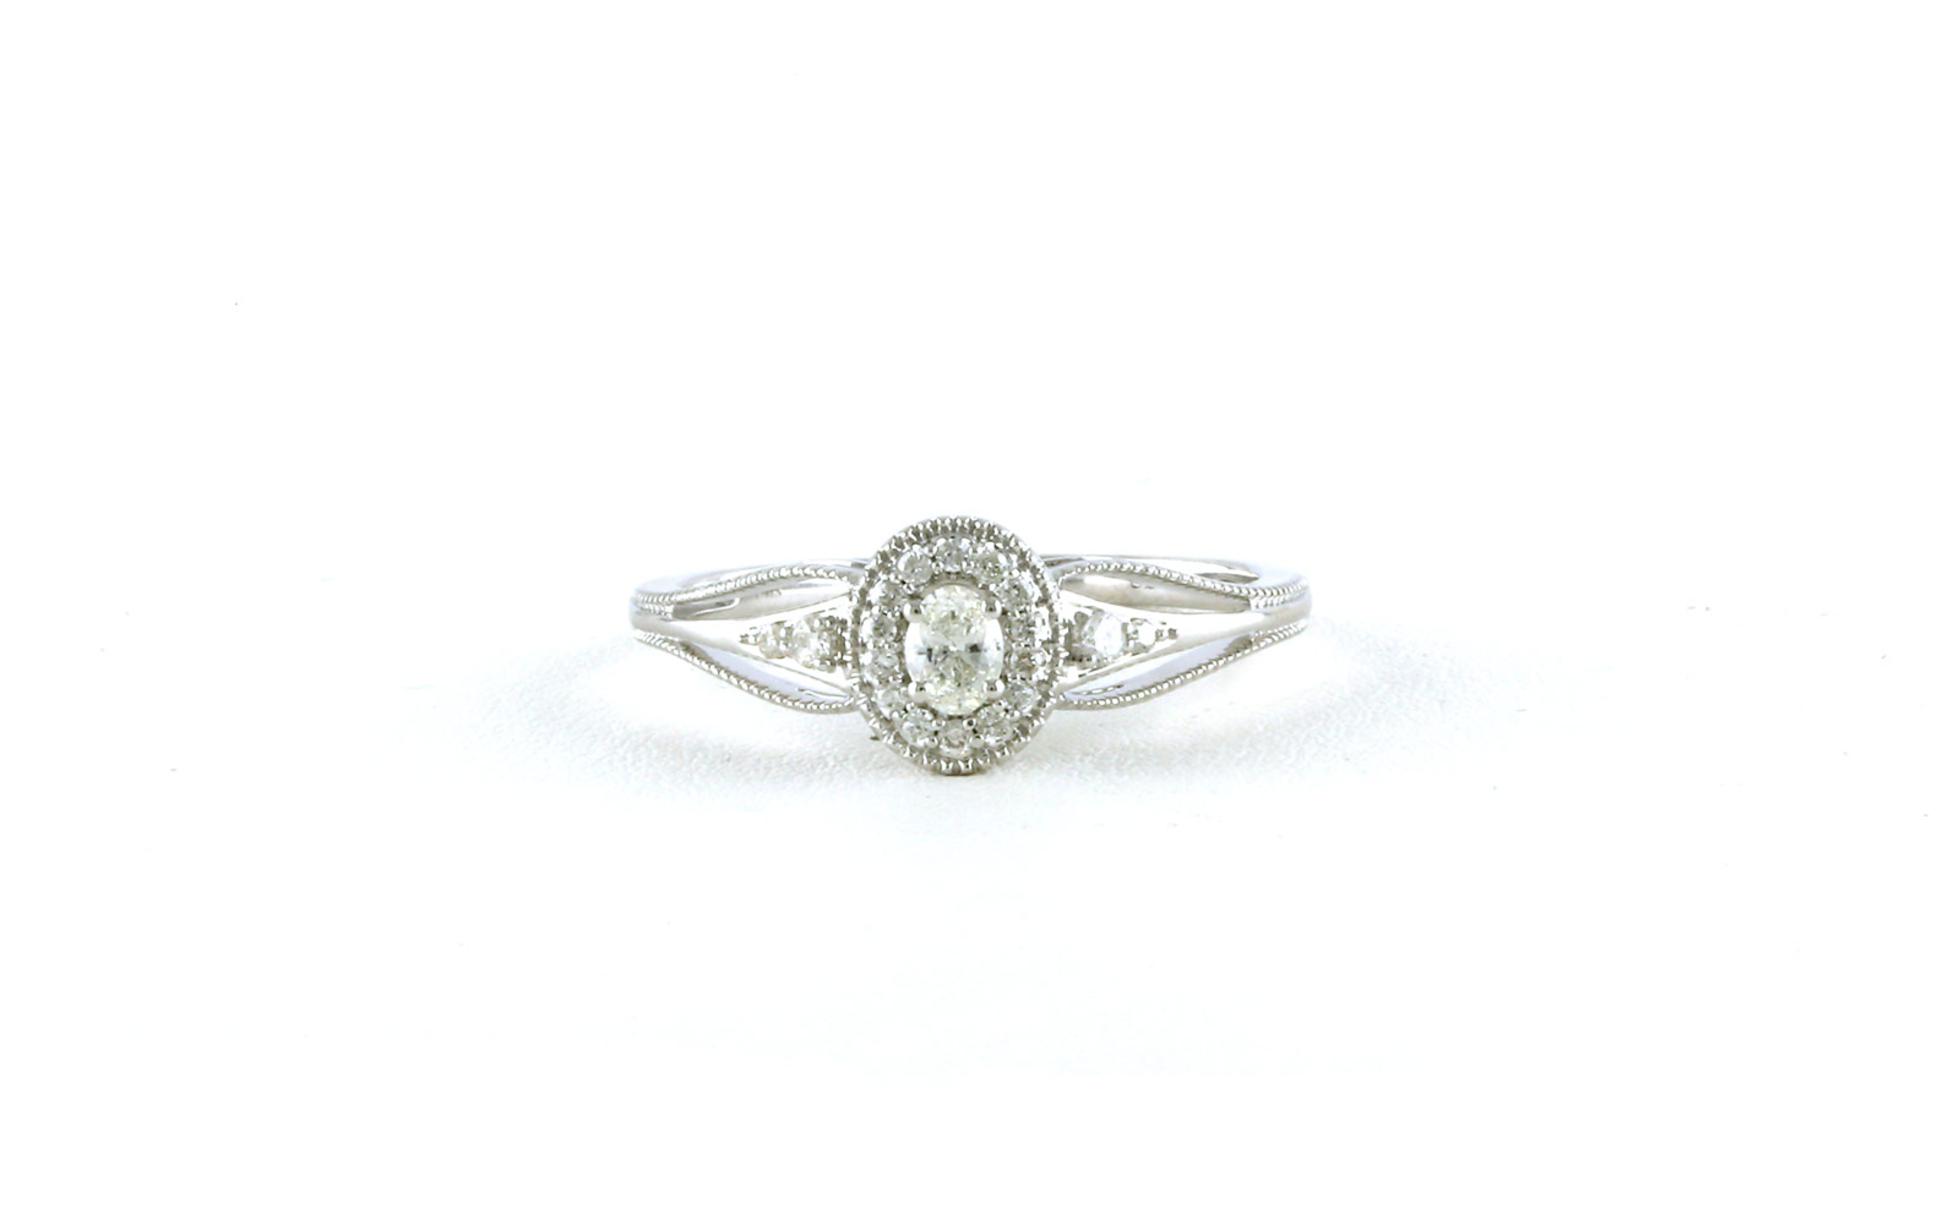 Halo-style Oval-cut Diamond Engagement Ring with Milgrain Band in White Gold (0.22cts TWT)